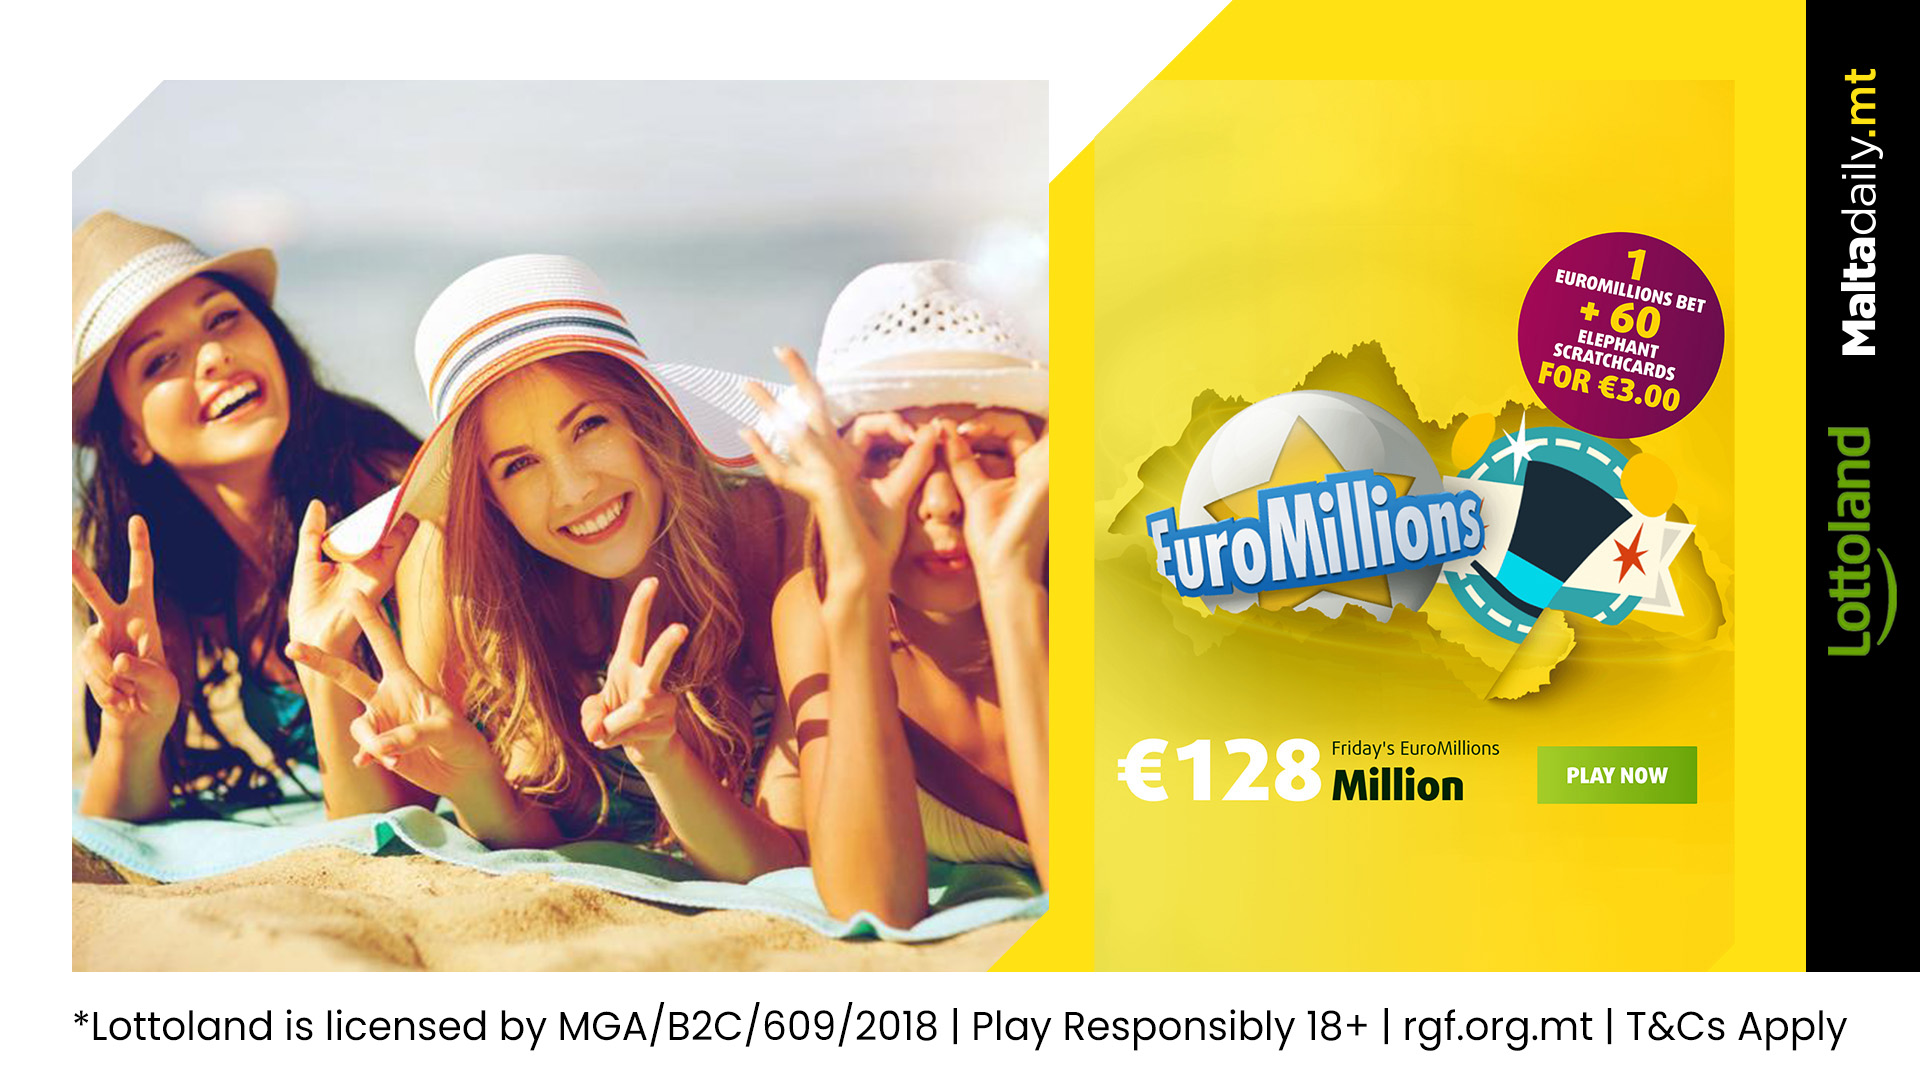 Get 60 FREE Scratchcards While Betting On Friday’s €128,000,000 EuroMillions